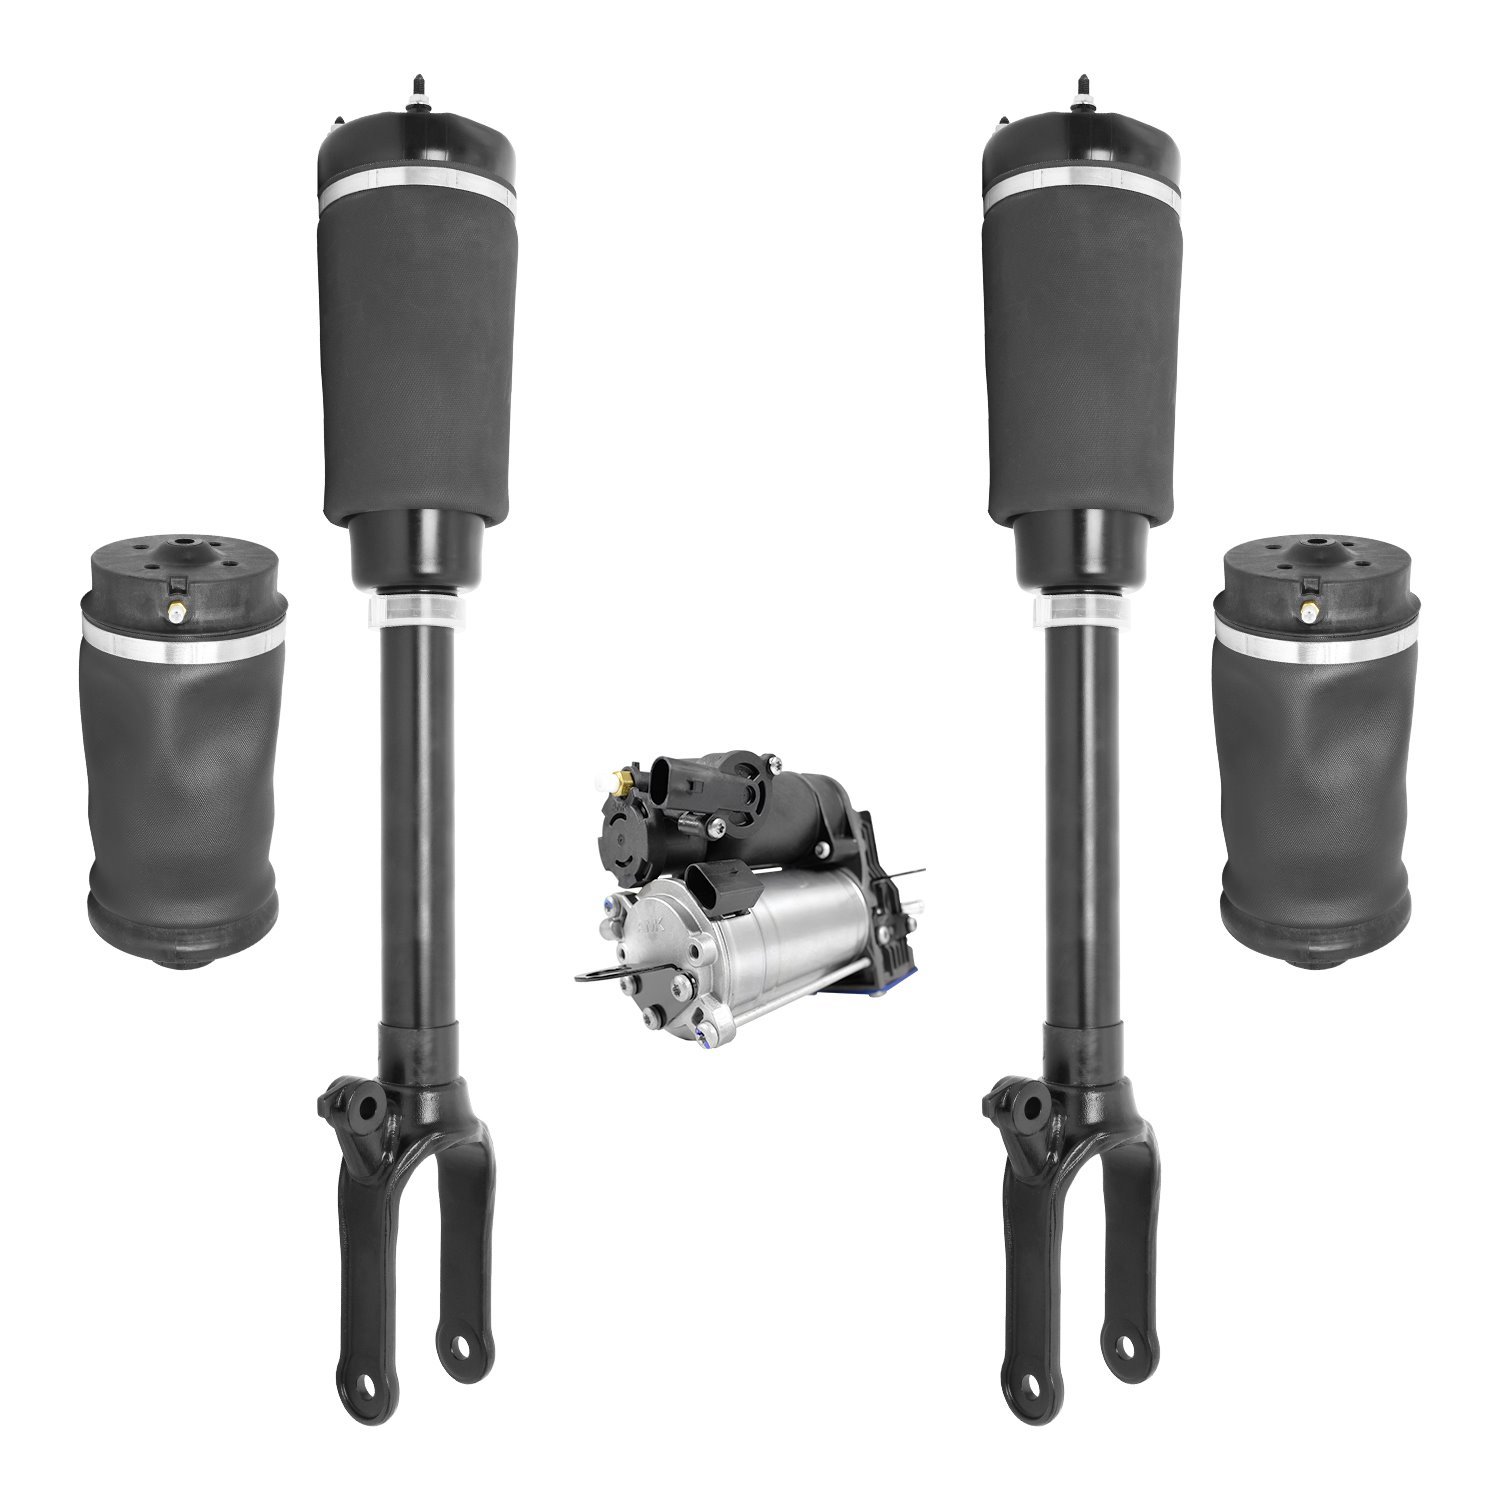 4-18-112900-4 Front & Rear Non-Electronic Suspension Air Strut Assembly Air Spring Kit Fits Select Mercedes-Benz